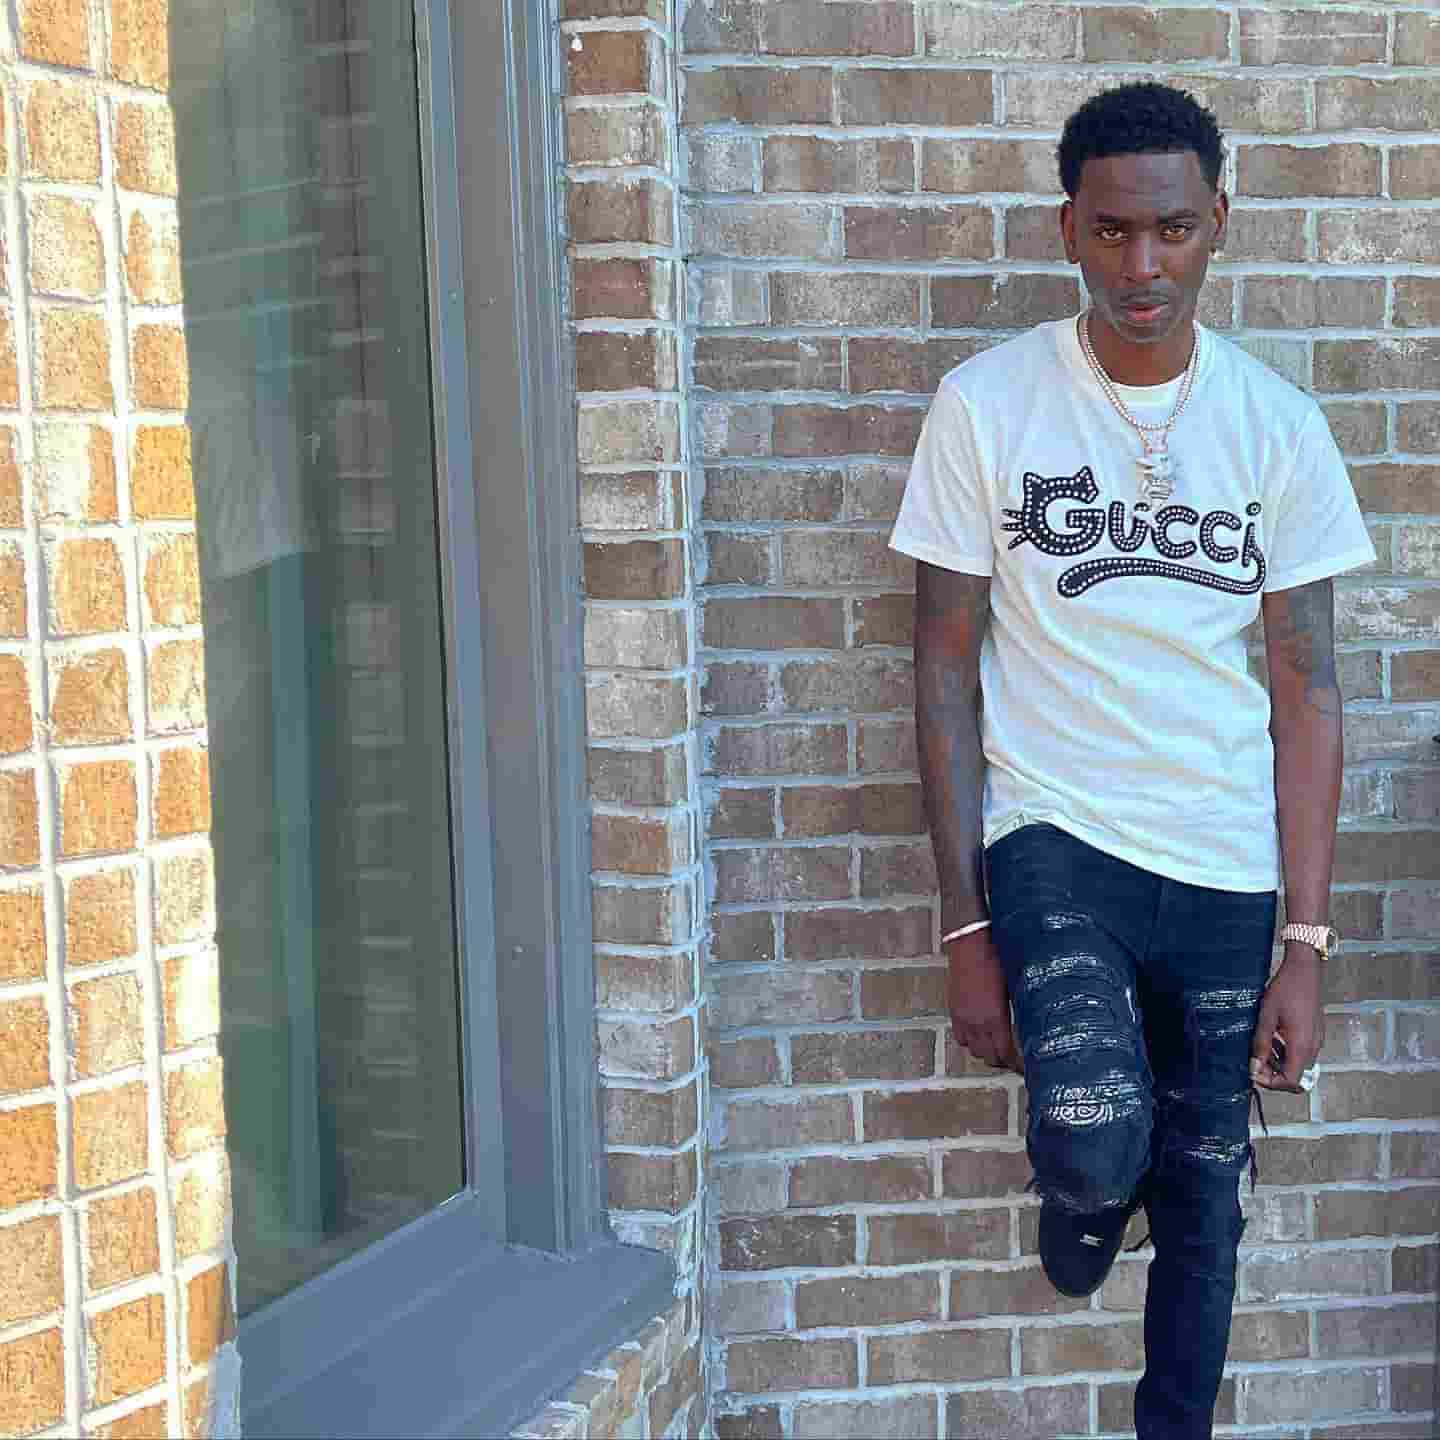 young dolph early life, young dolph career, young dolph personal life, young dolph social media, young dolph biography, young dolph death, young dolph, young dolph net worth, young dolph net worth 2022